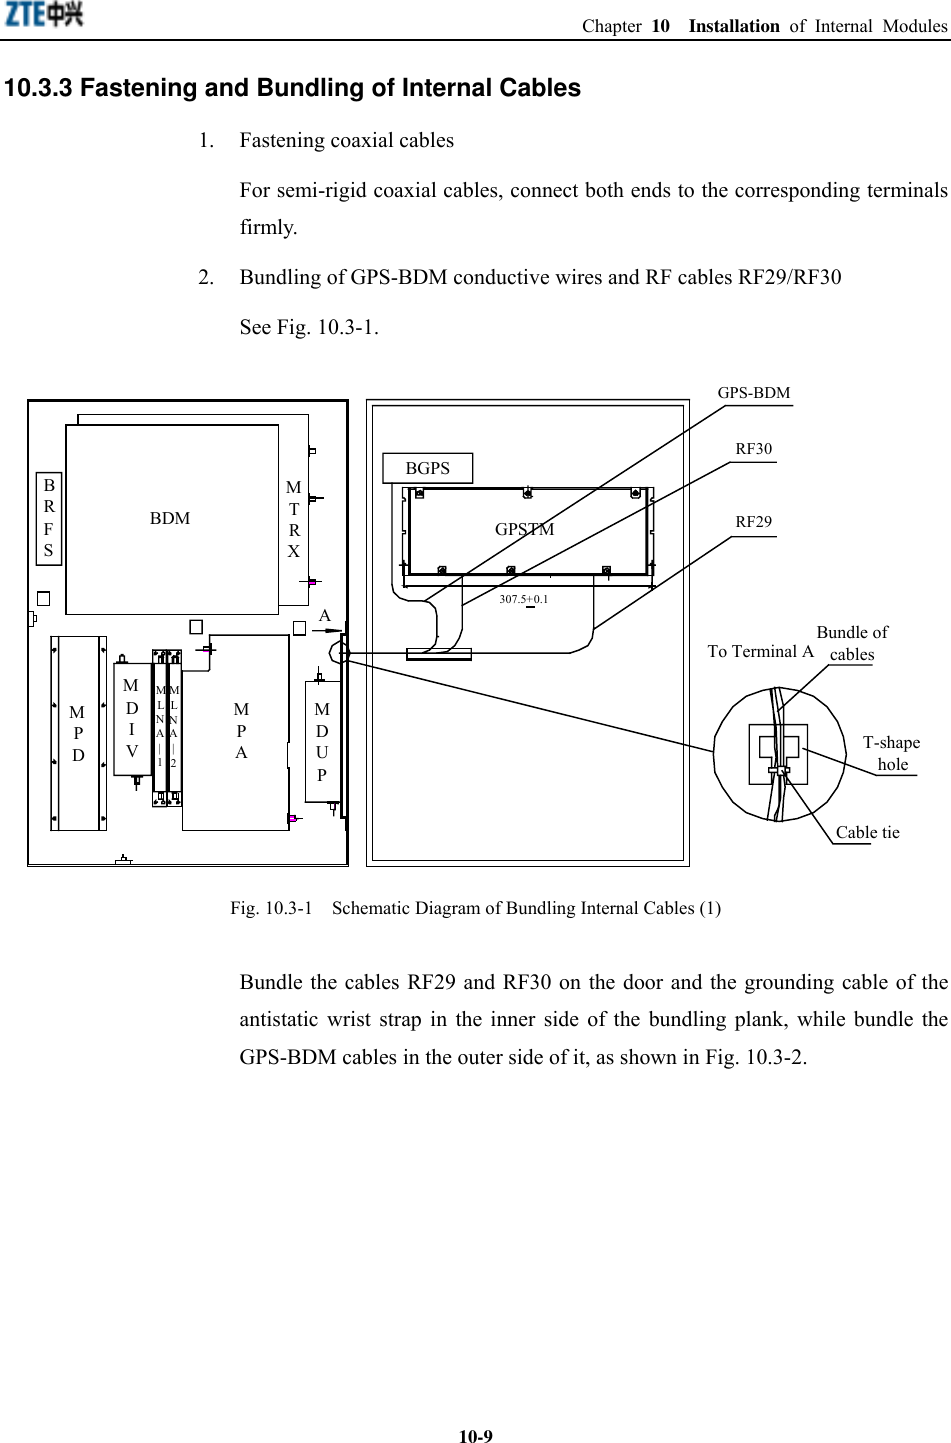  Chapter 10  Installation of Internal Modules  10-910.3.3 Fastening and Bundling of Internal Cables 1.  Fastening coaxial cables For semi-rigid coaxial cables, connect both ends to the corresponding terminals firmly. 2.  Bundling of GPS-BDM conductive wires and RF cables RF29/RF30 See Fig. 10.3-1. BDMBRFSBGPSMTRXMPDMDIVMLNA|1MLNA|2MPAMDUPAGPSTM307.5+0.1GPS-BDMRF30RF29To Terminal ABundle ofcablesT-shapeholeCable tie Fig. 10.3-1  Schematic Diagram of Bundling Internal Cables (1) Bundle the cables RF29 and RF30 on the door and the grounding cable of the antistatic wrist strap in the inner side of the bundling plank, while bundle the GPS-BDM cables in the outer side of it, as shown in Fig. 10.3-2. 